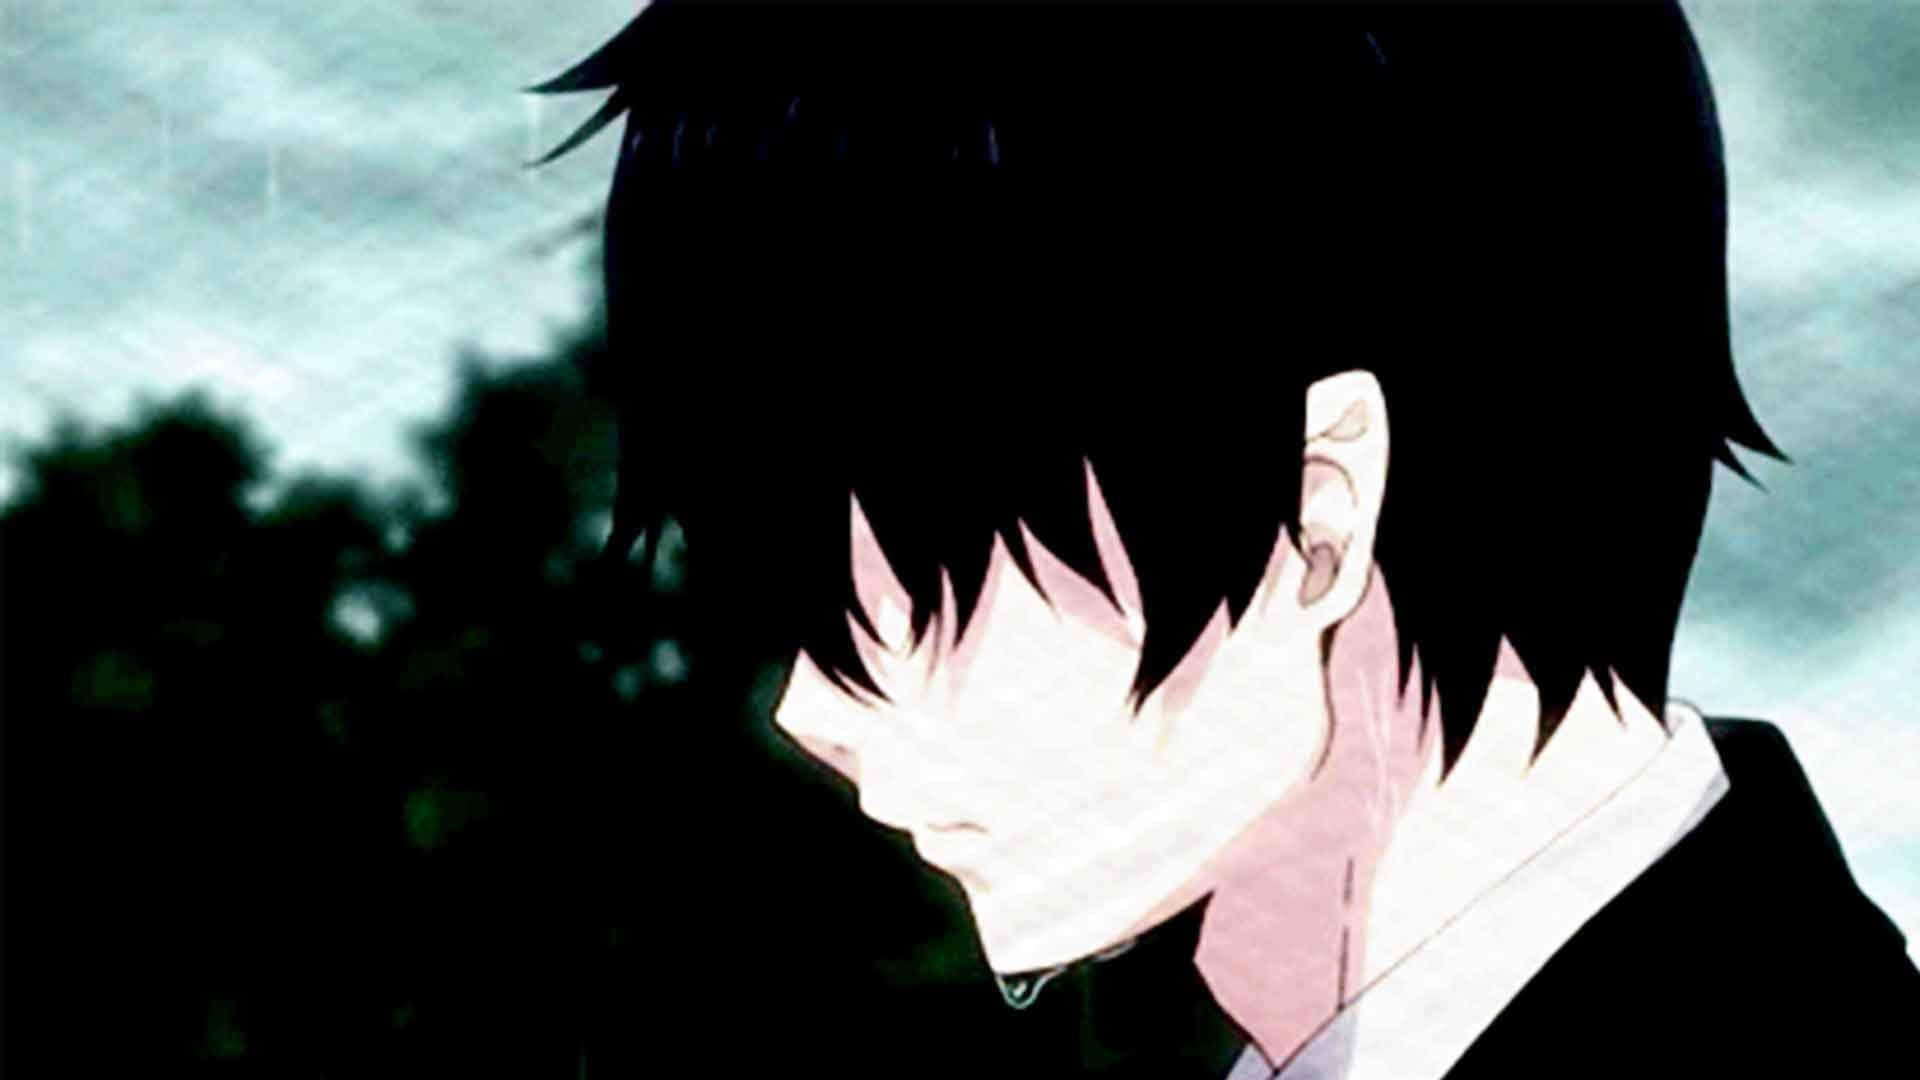 Sad Crying Anime Guy In A Black Suit Wallpaper